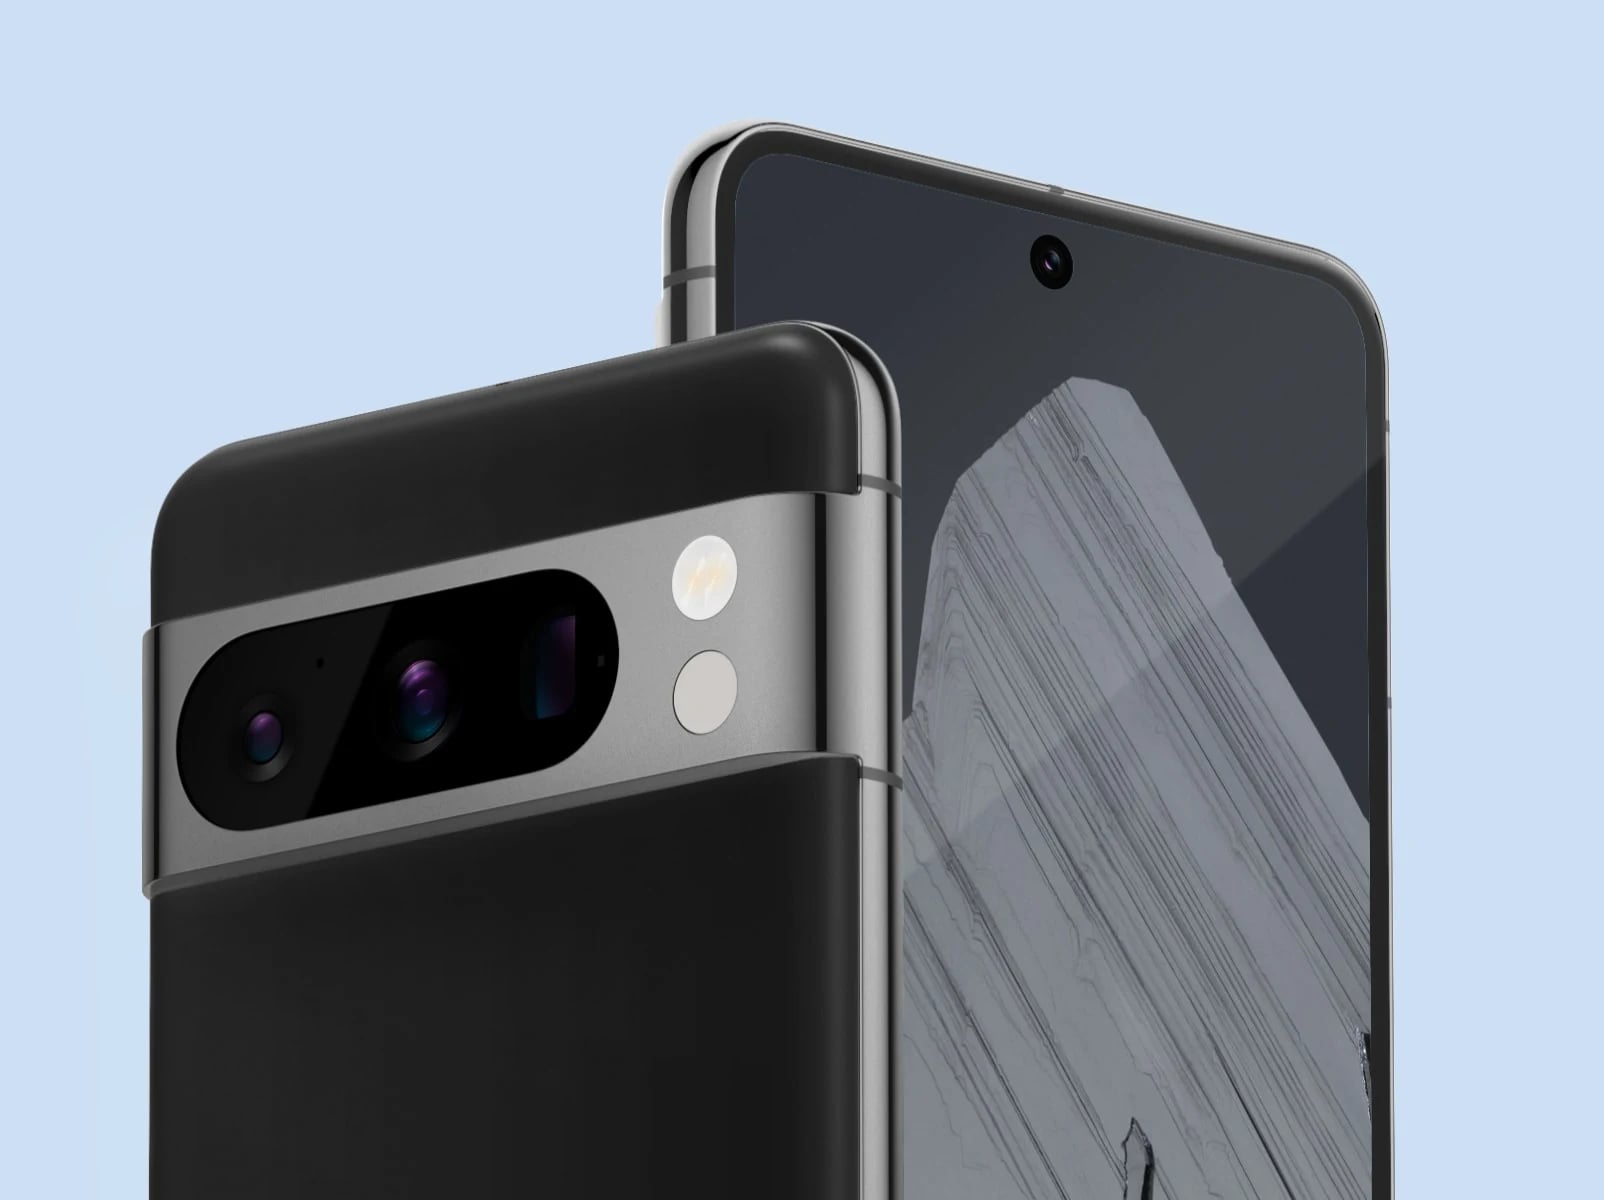 The front and back of Pixel 8 Pro in Obsidian colour. The back shows off its matte back glass, while the front shows off its brilliant display.